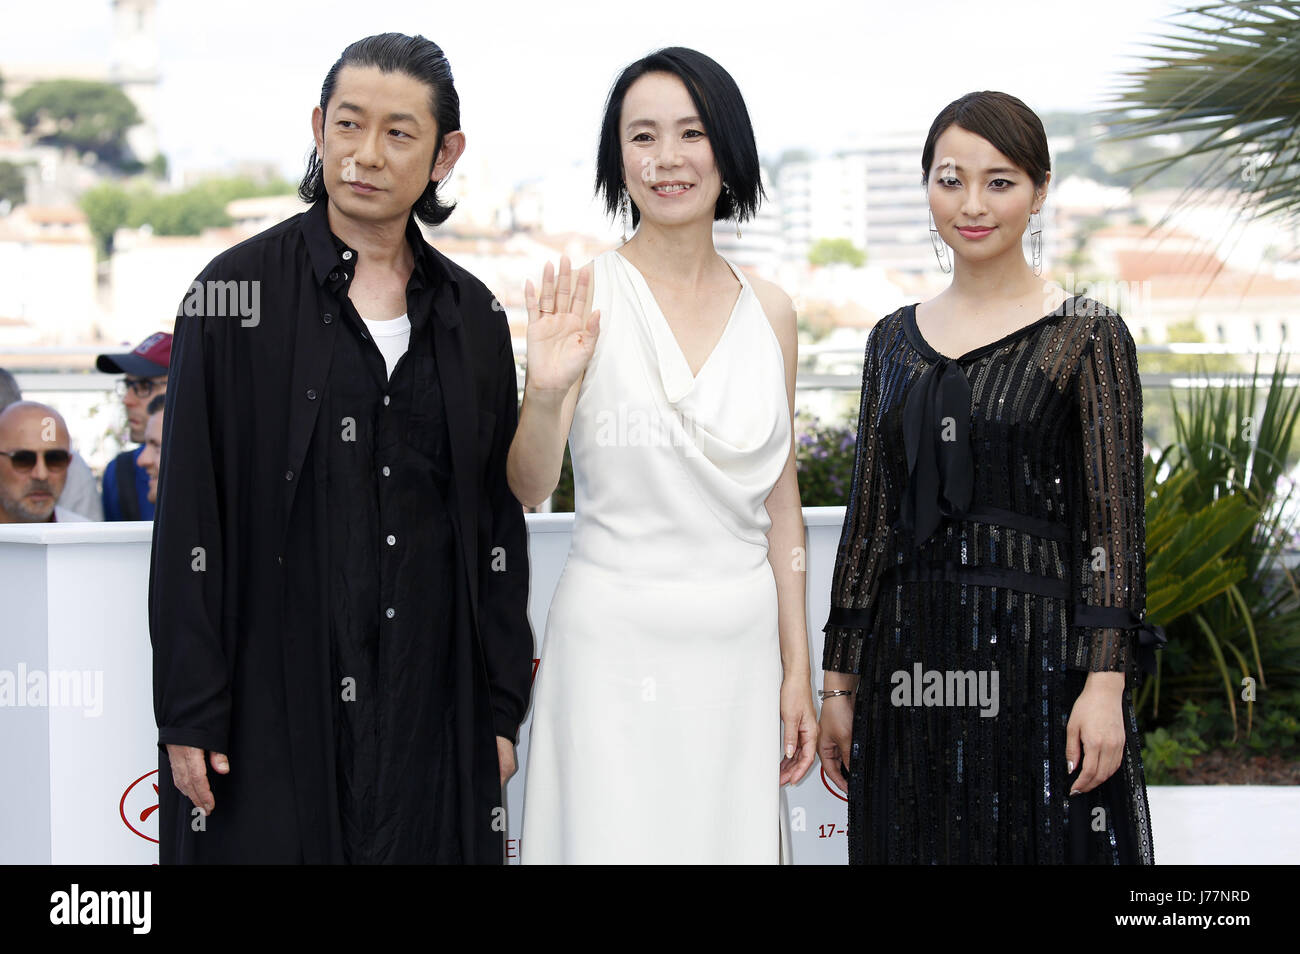 Masatoshi Nagase, Misuzu Kanno and Ayame Misaki at the 'Radiance / Hikari / Vers la lumière' photocall during the 70th Cannes Film Festival at the Palais des Festivals on May 23, 2017 in Cannes, France | Verwendung weltweit Stock Photo